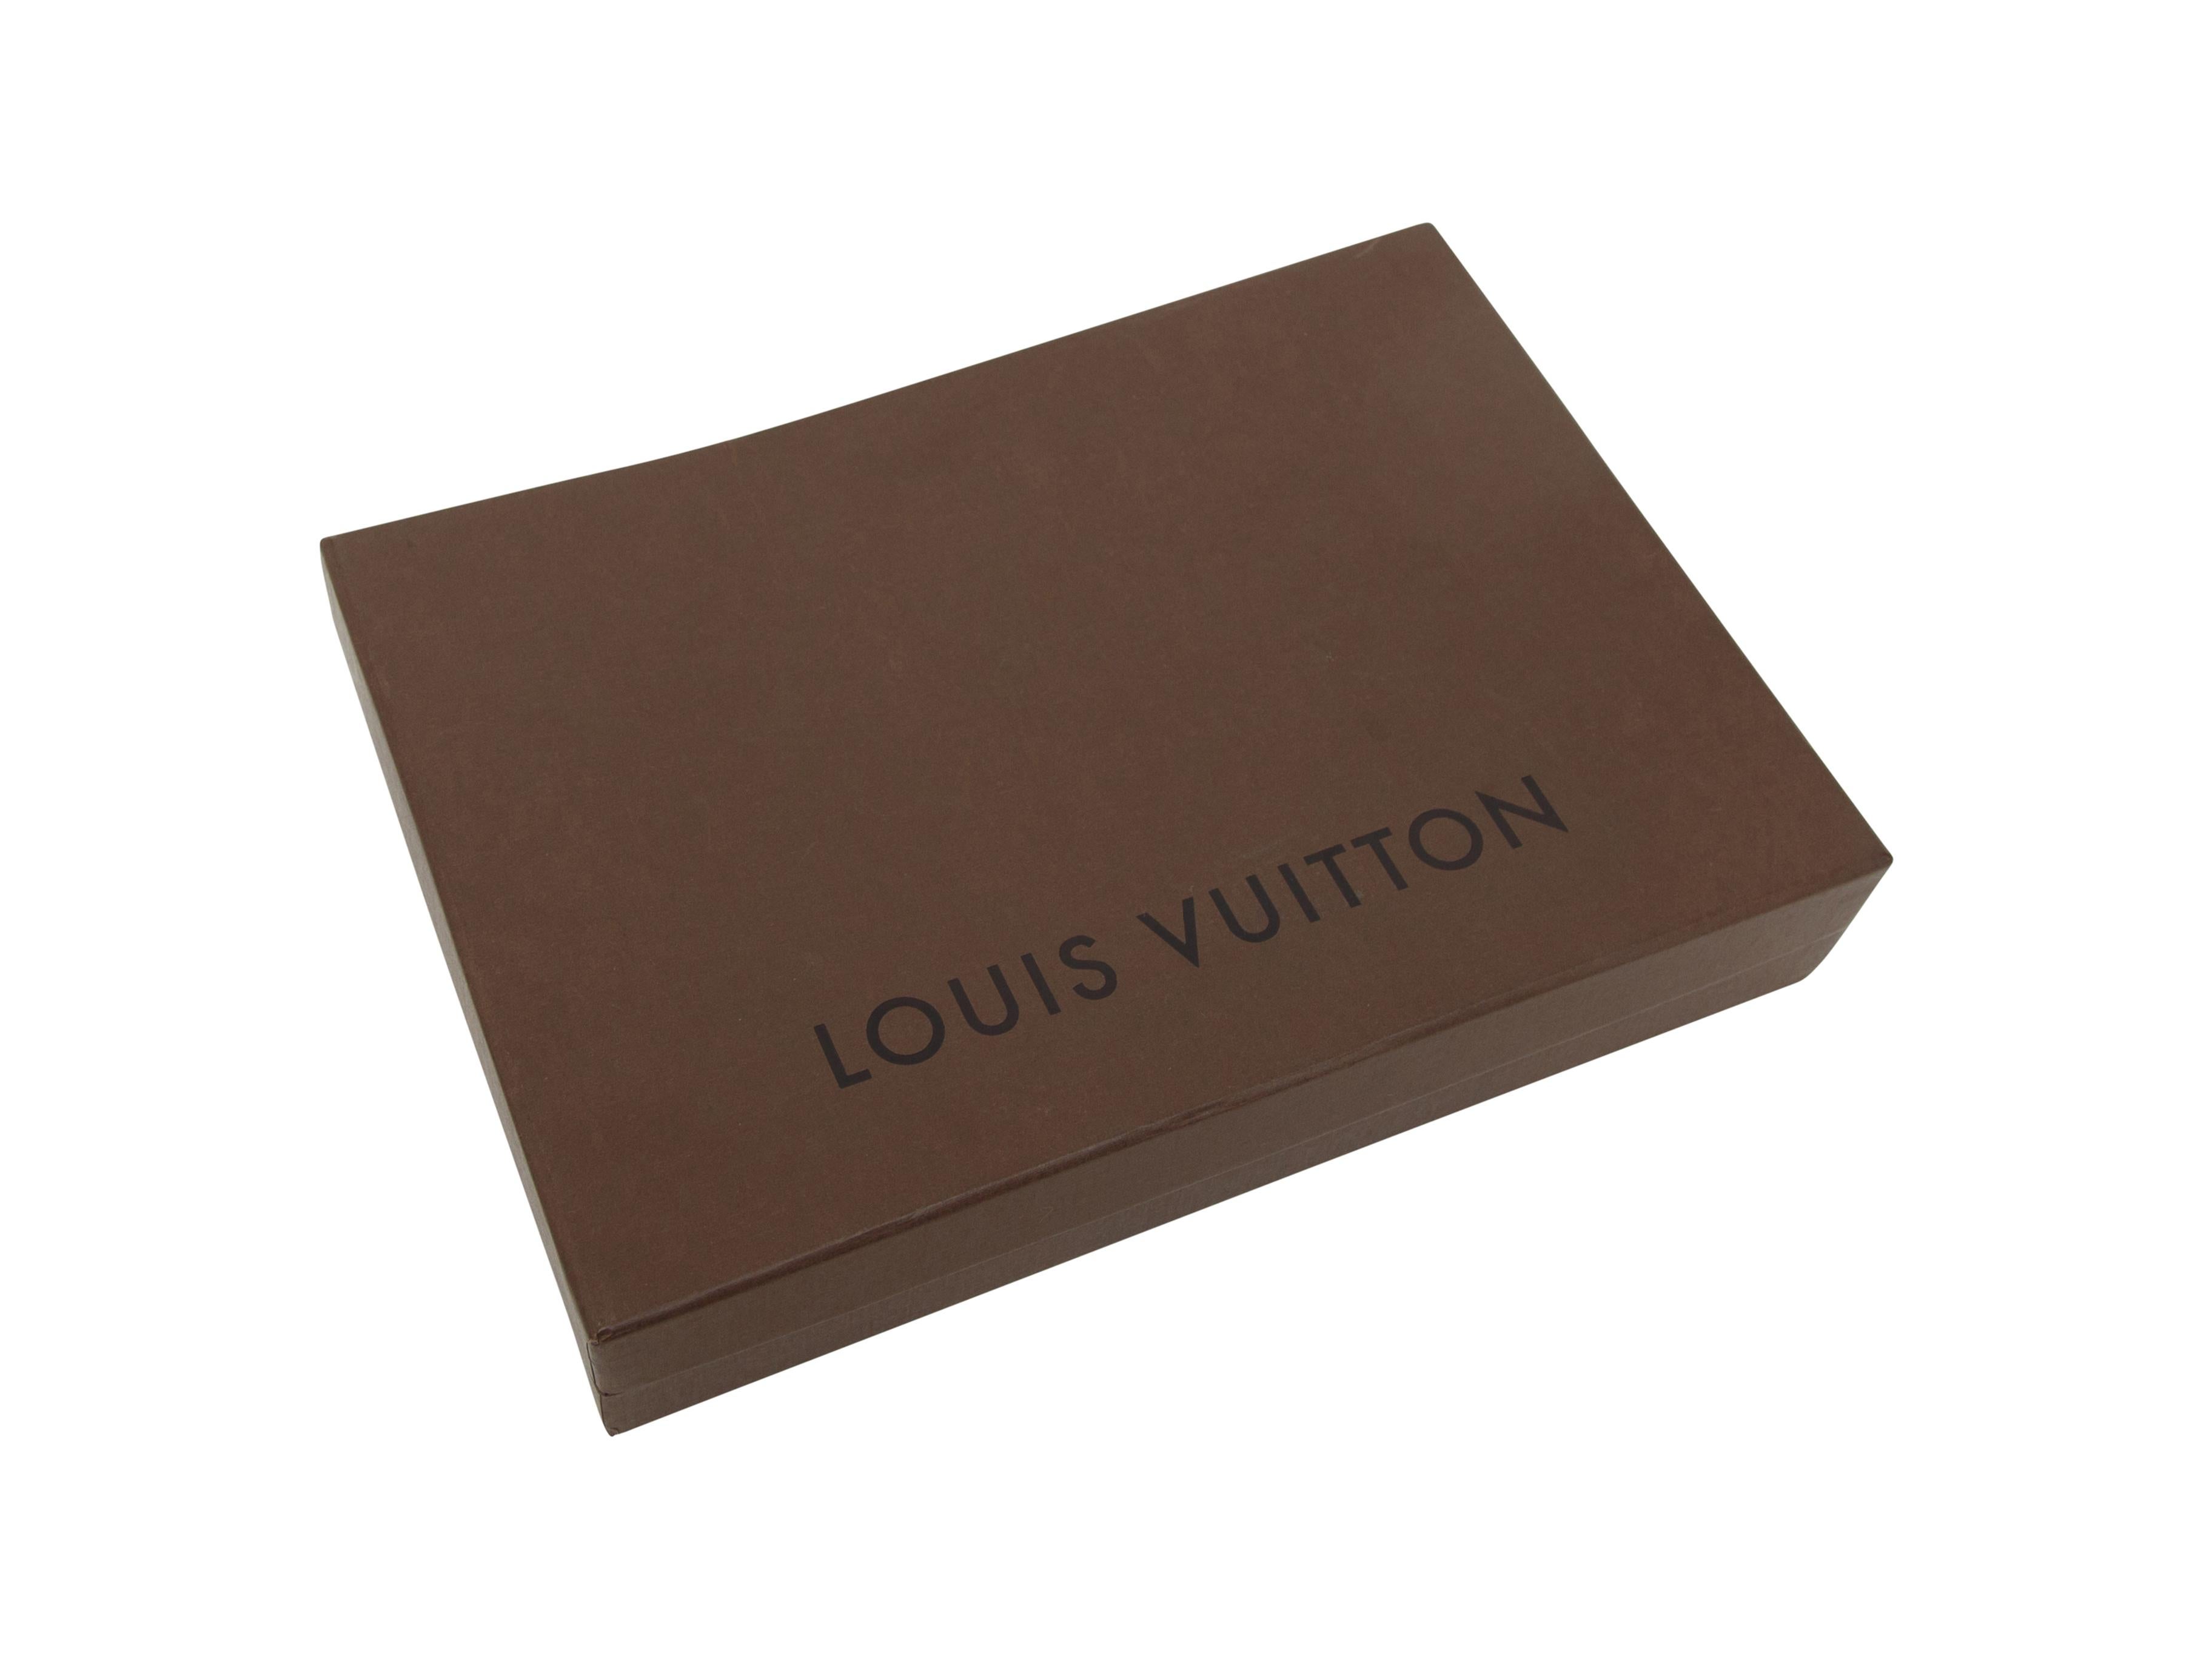 Product details: Cream satin headband by Louis Vuitton. From the Spring/Summer 2013 Collection. Bow accent at top. 5.5